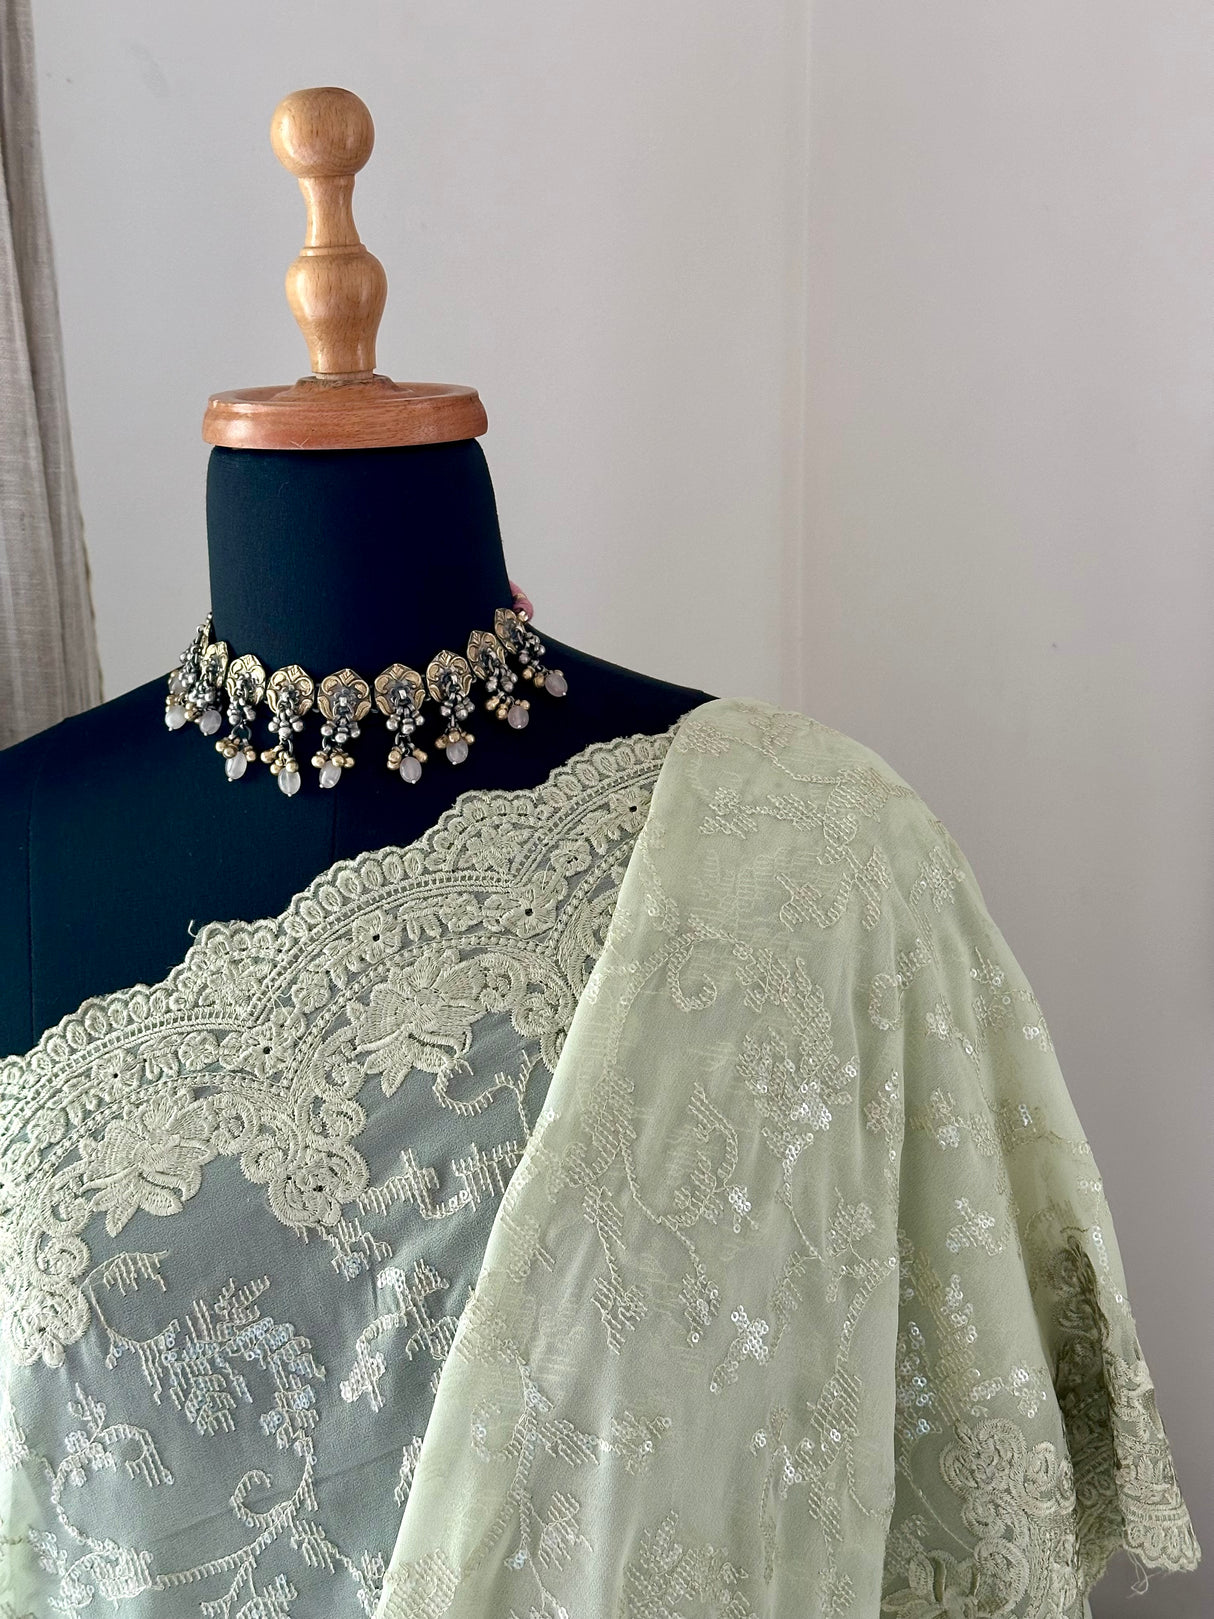 Georgette saree embellished with machine embroidery